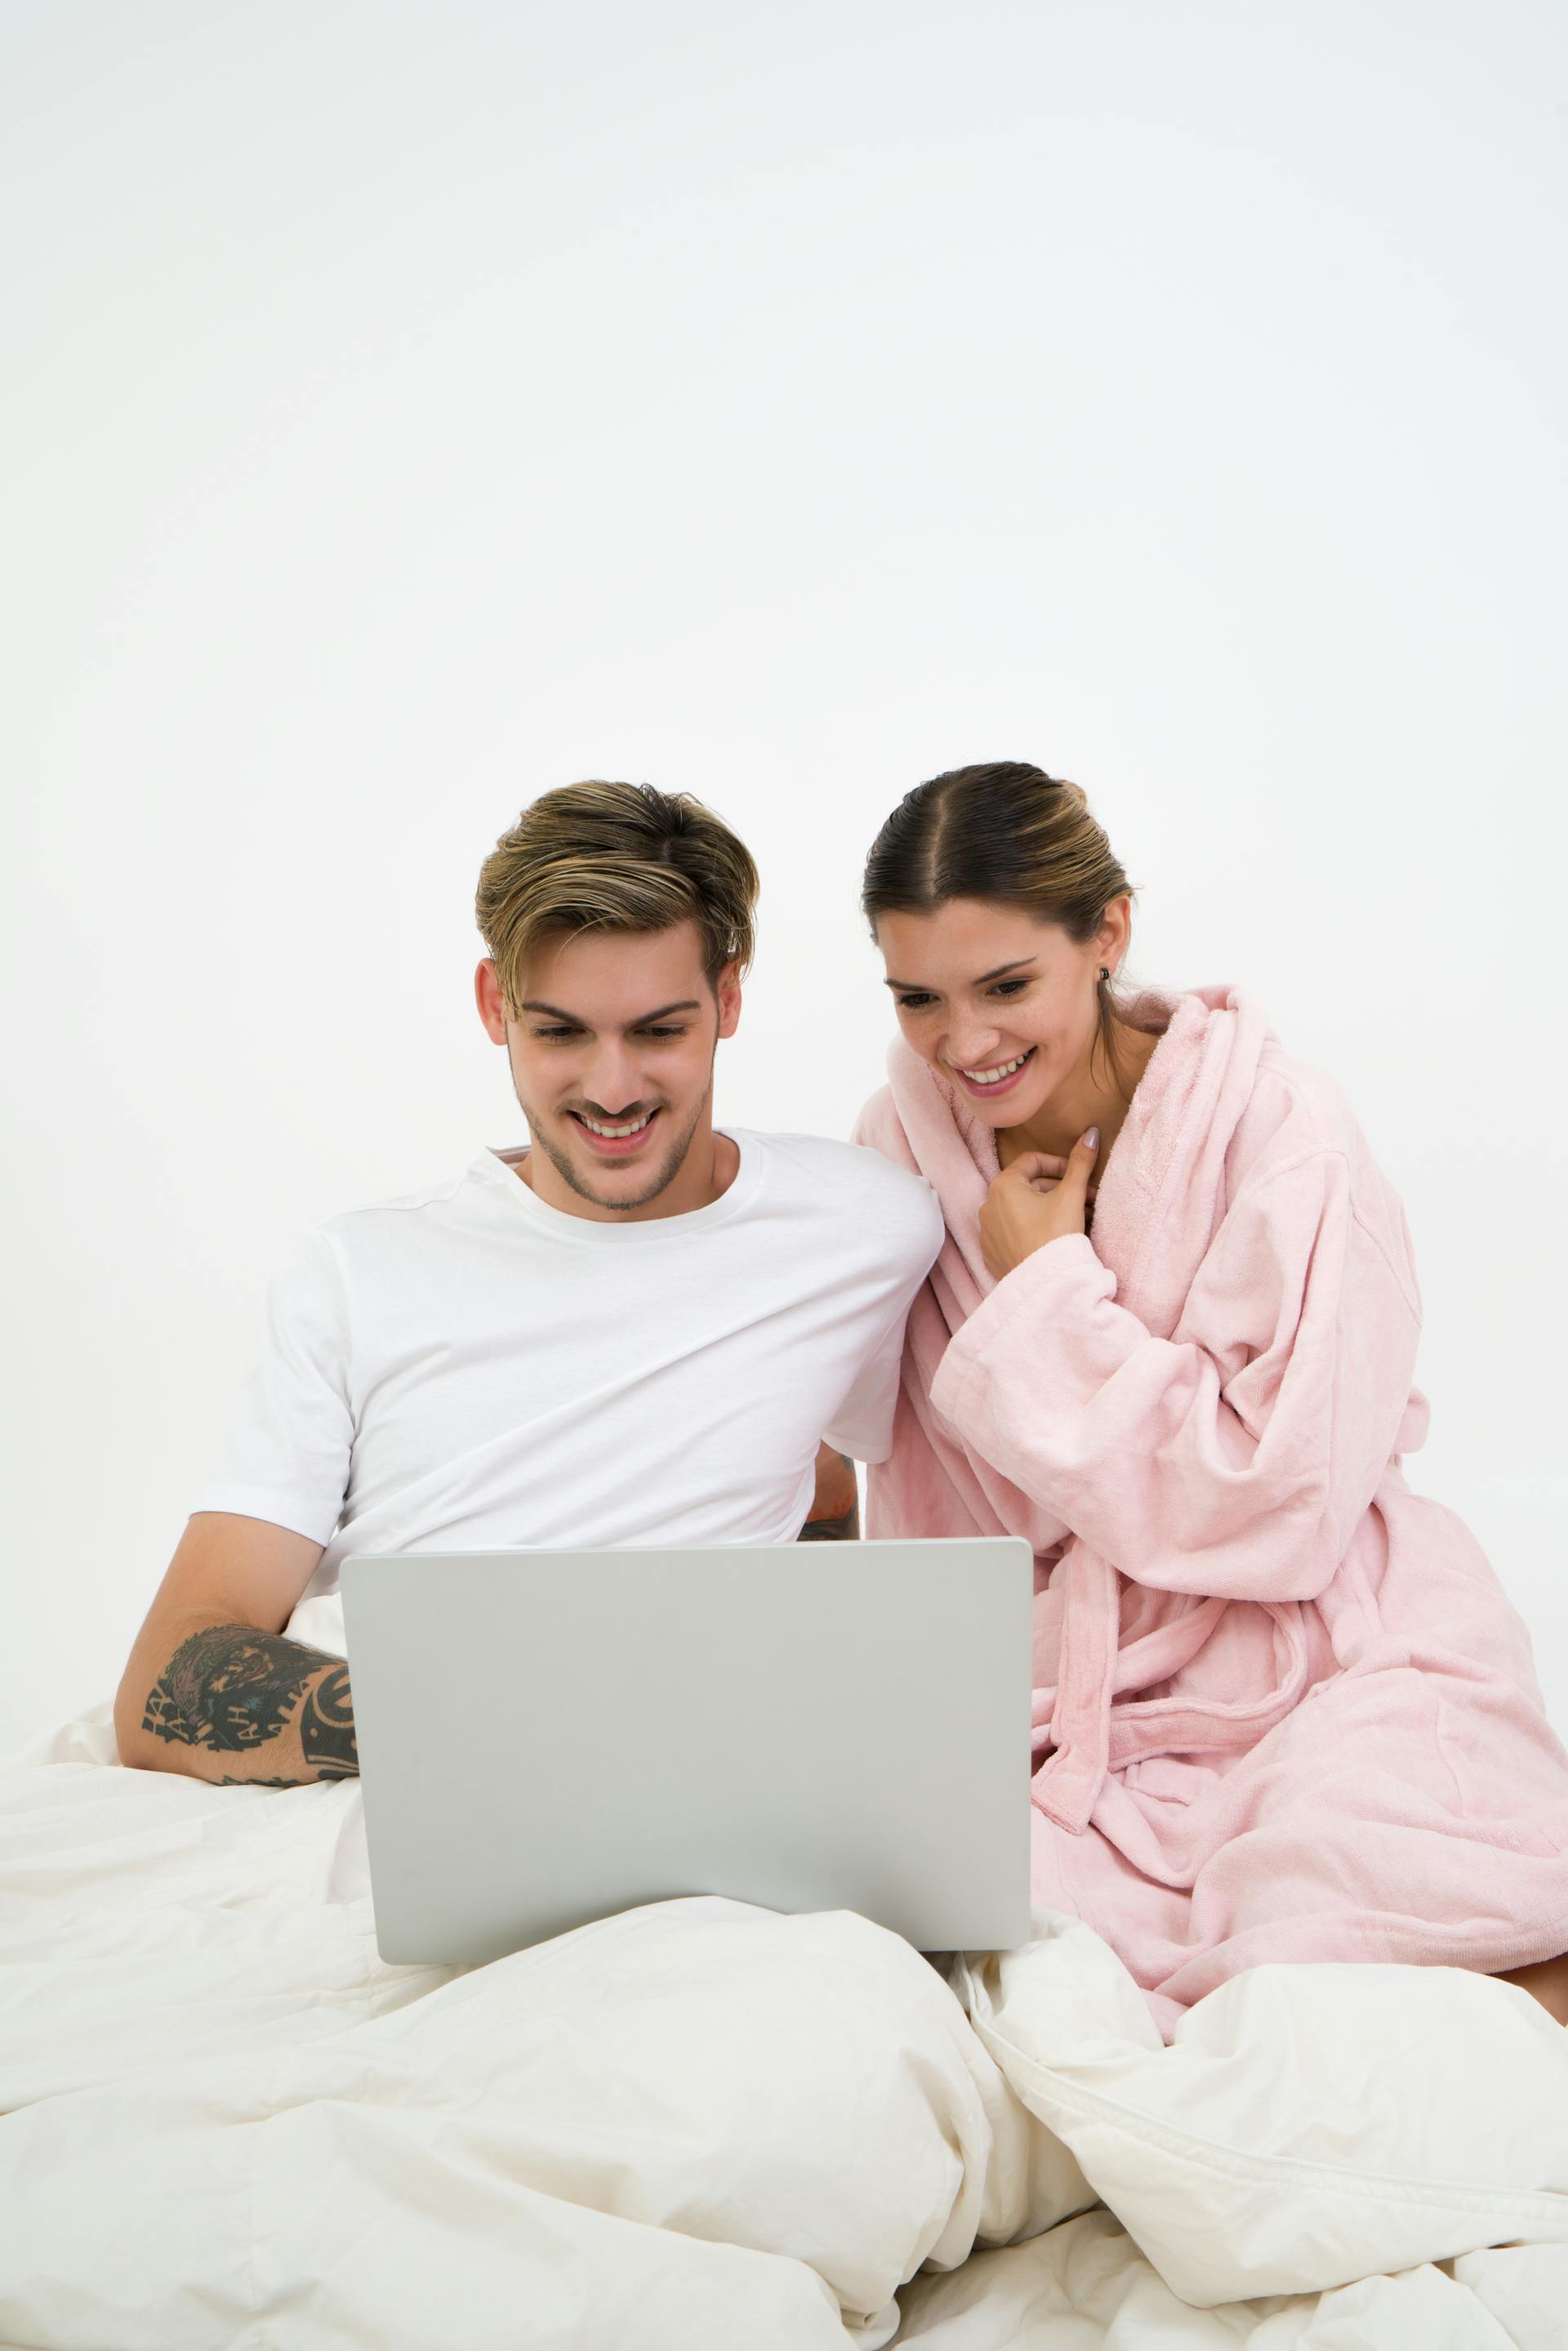 A young couple using  a laptop | Source: Pexels